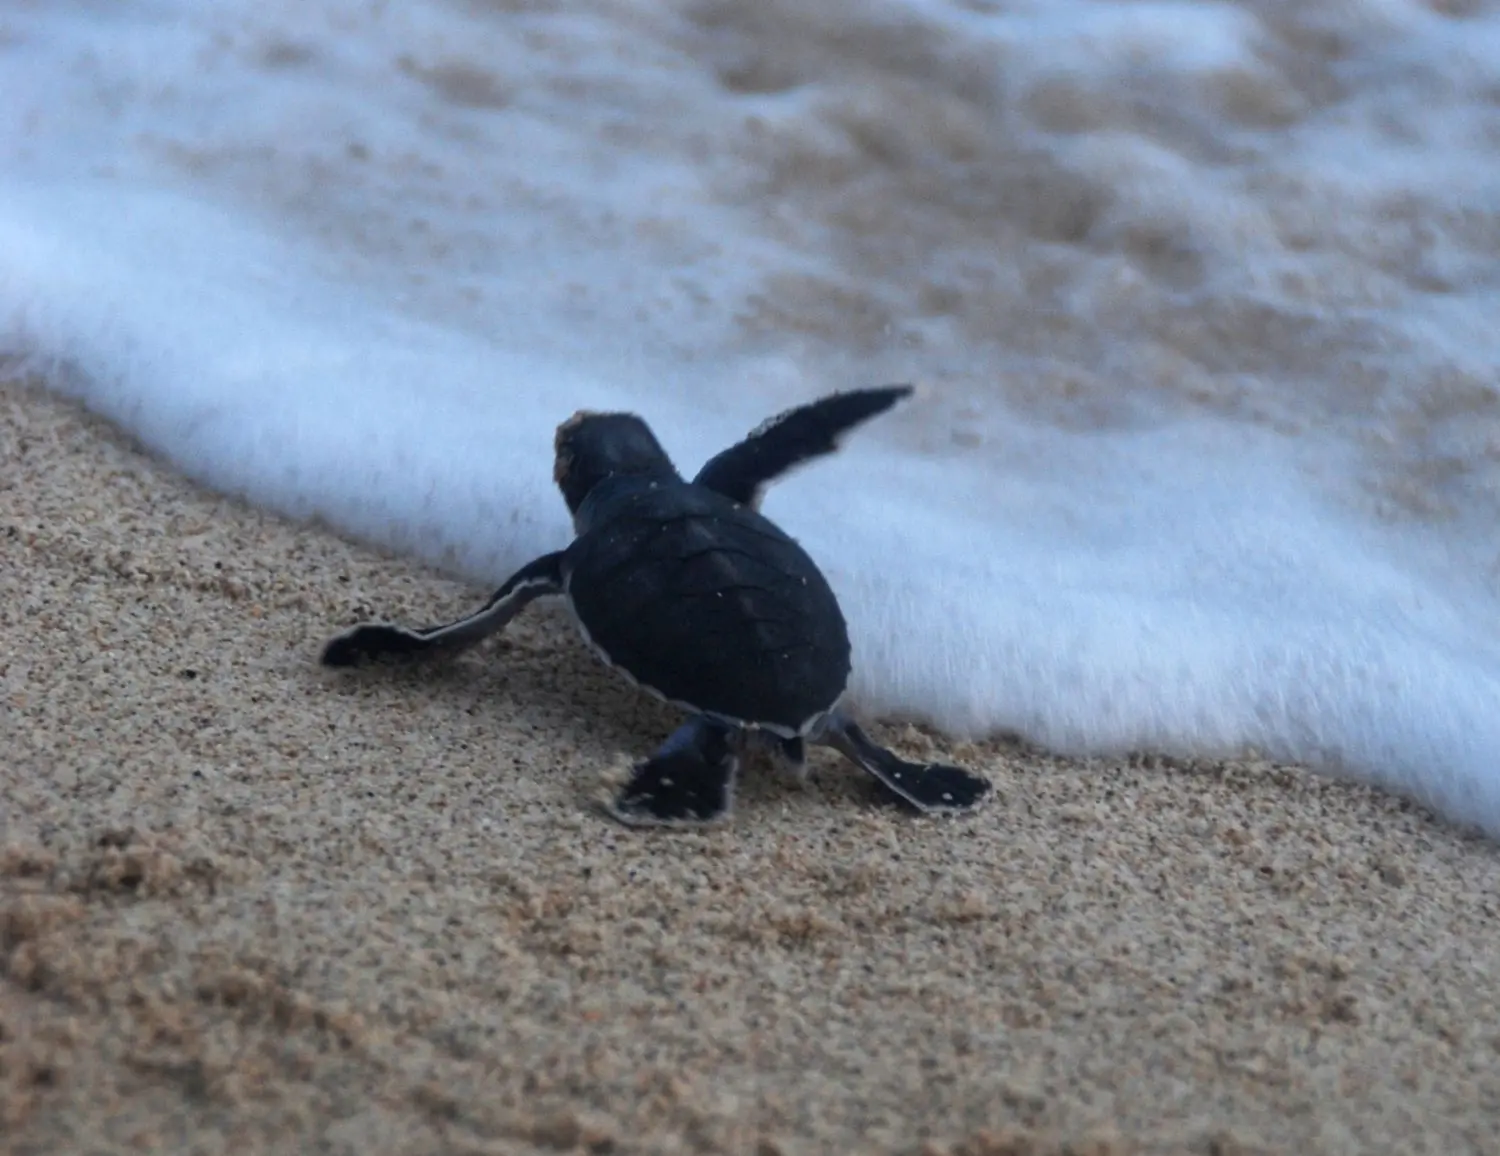 A new born turtle headed to the sea 